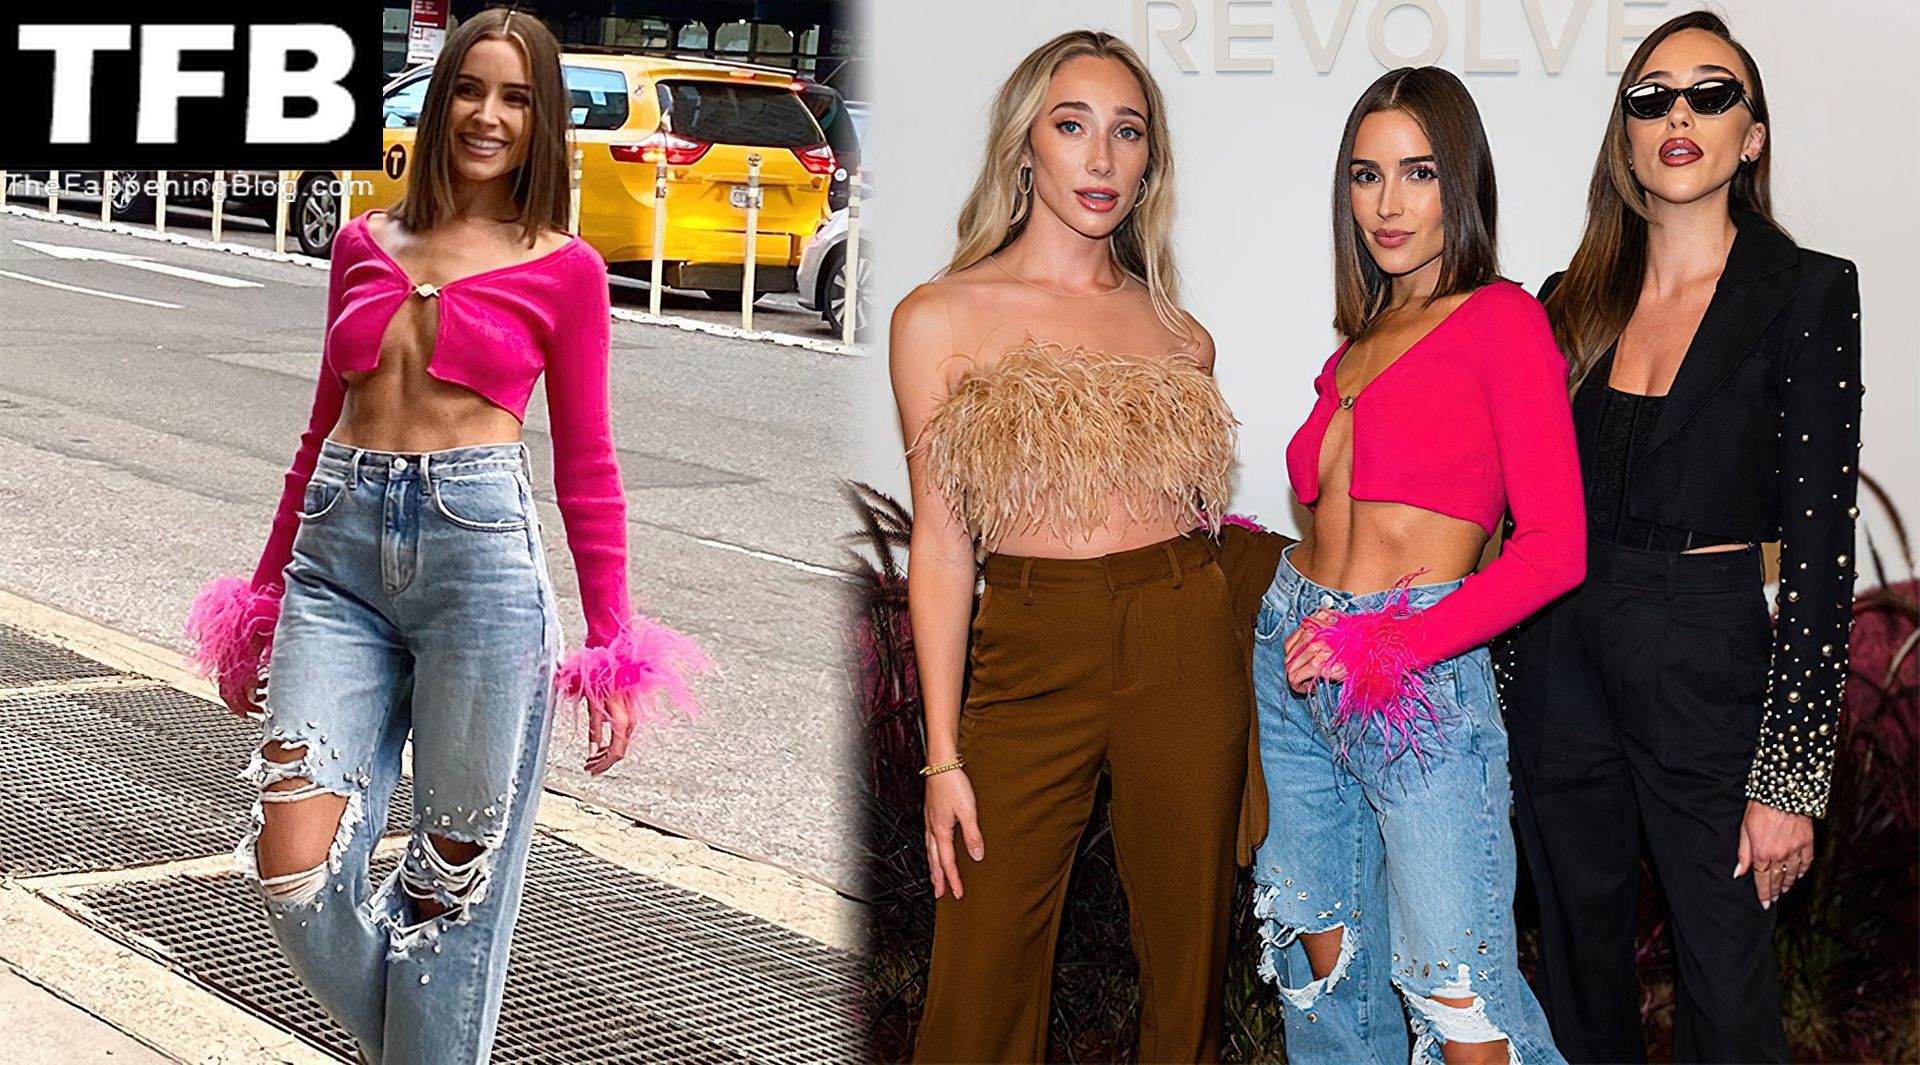 Olivia Culpo Attends the Revolve Party in a Revealing Top (27 Photos + Video)